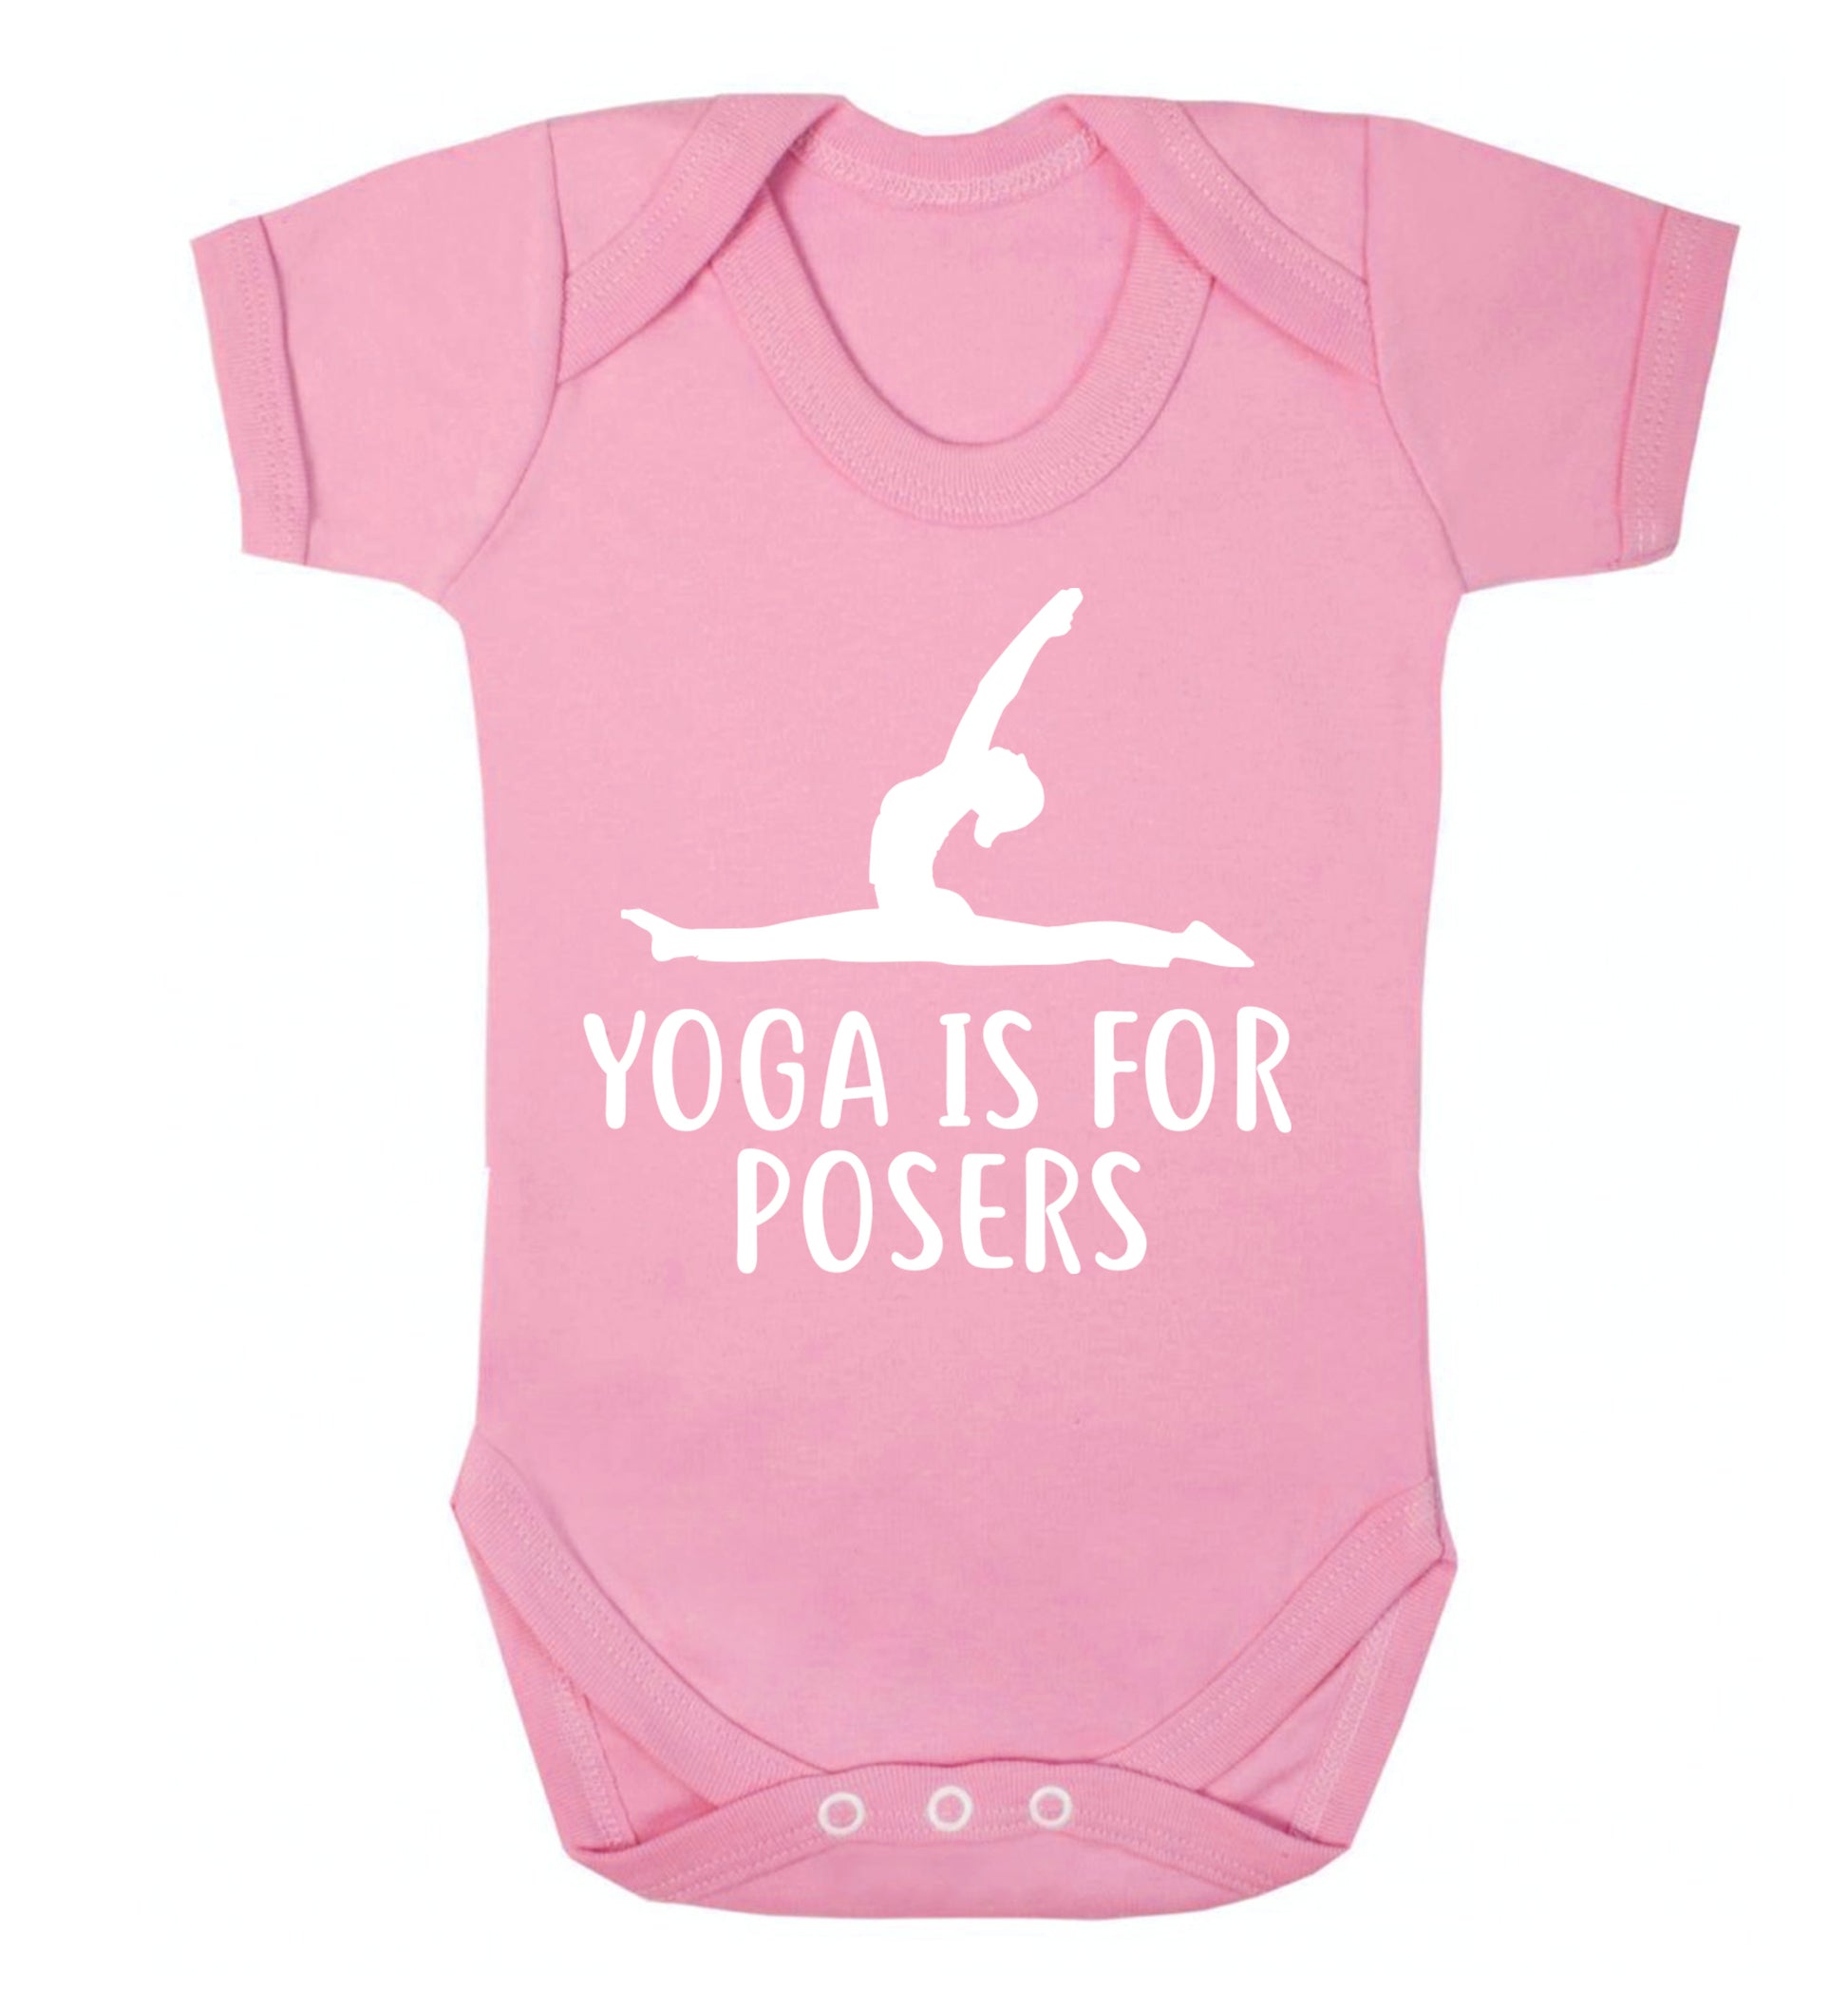 Yoga is for posers Baby Vest pale pink 18-24 months